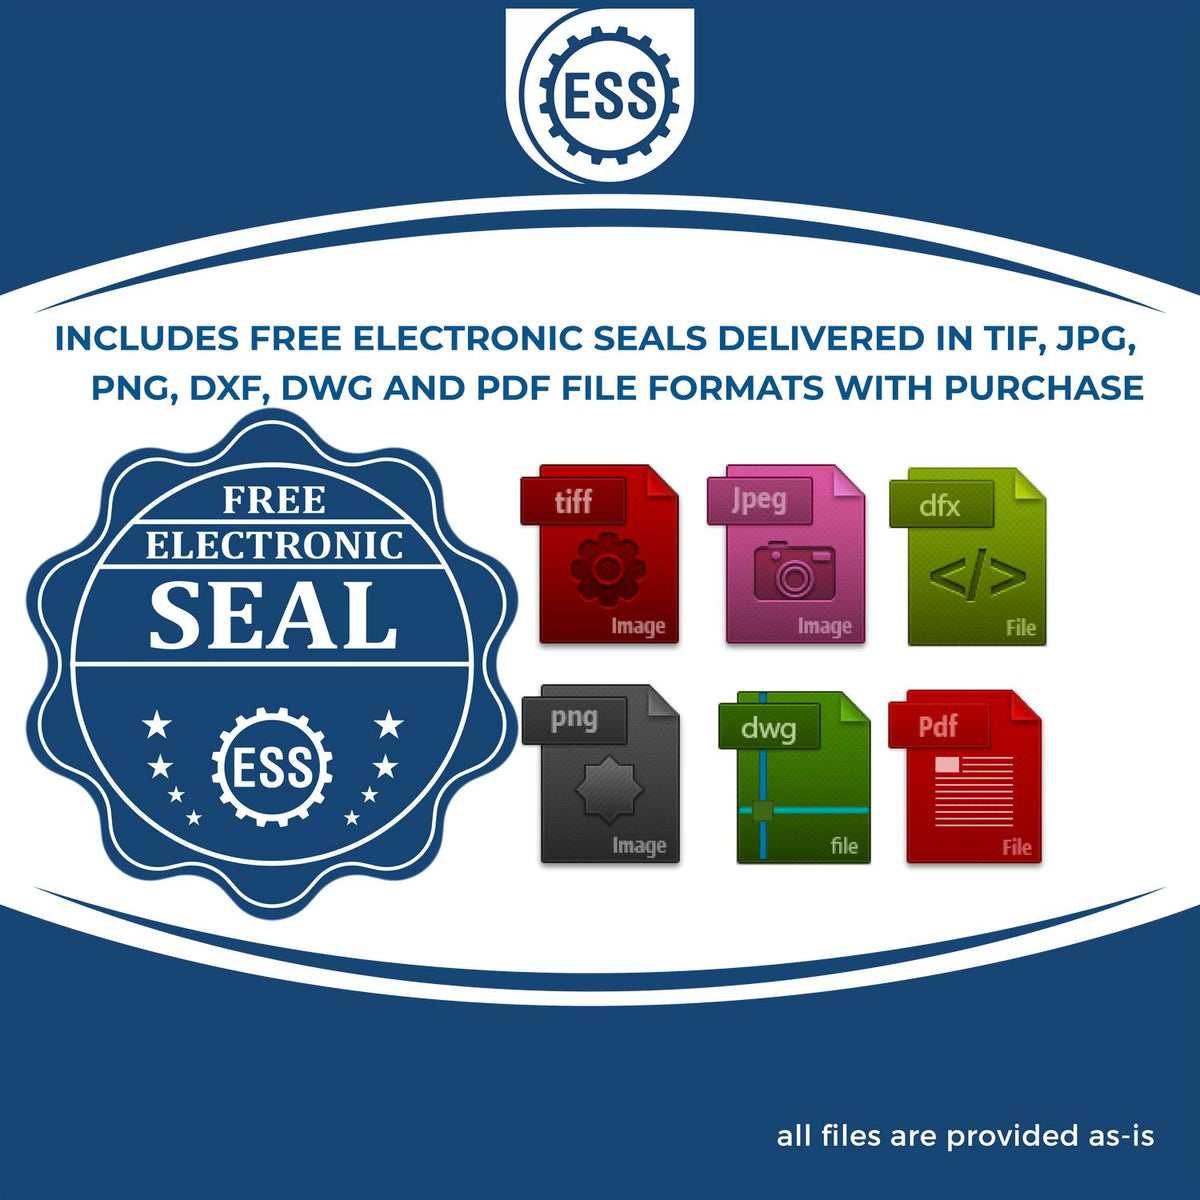 An infographic for the free electronic seal for the Hybrid New Hampshire Architect Seal illustrating the different file type icons such as DXF, DWG, TIF, JPG and PNG.